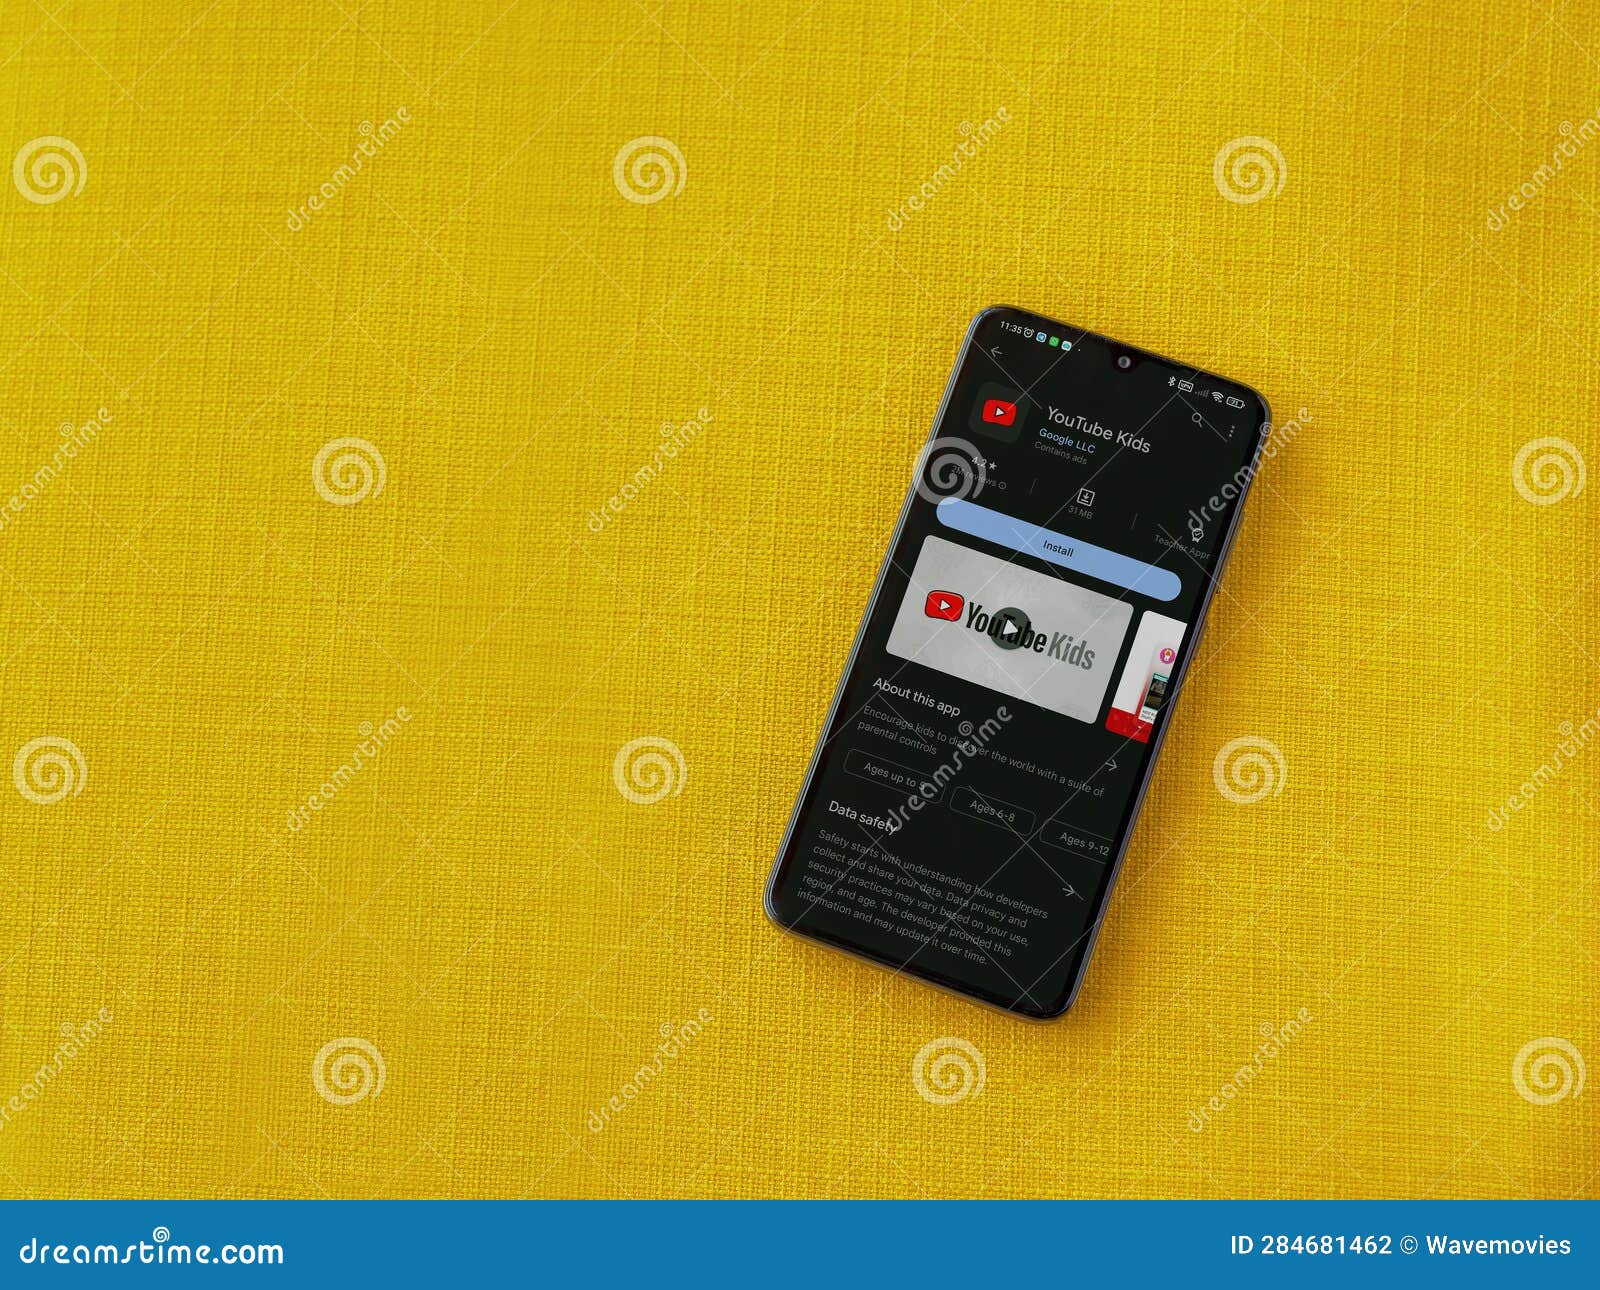 YouTube Kids App Play Store Page on Smartphone on a Yellow Fabric ...